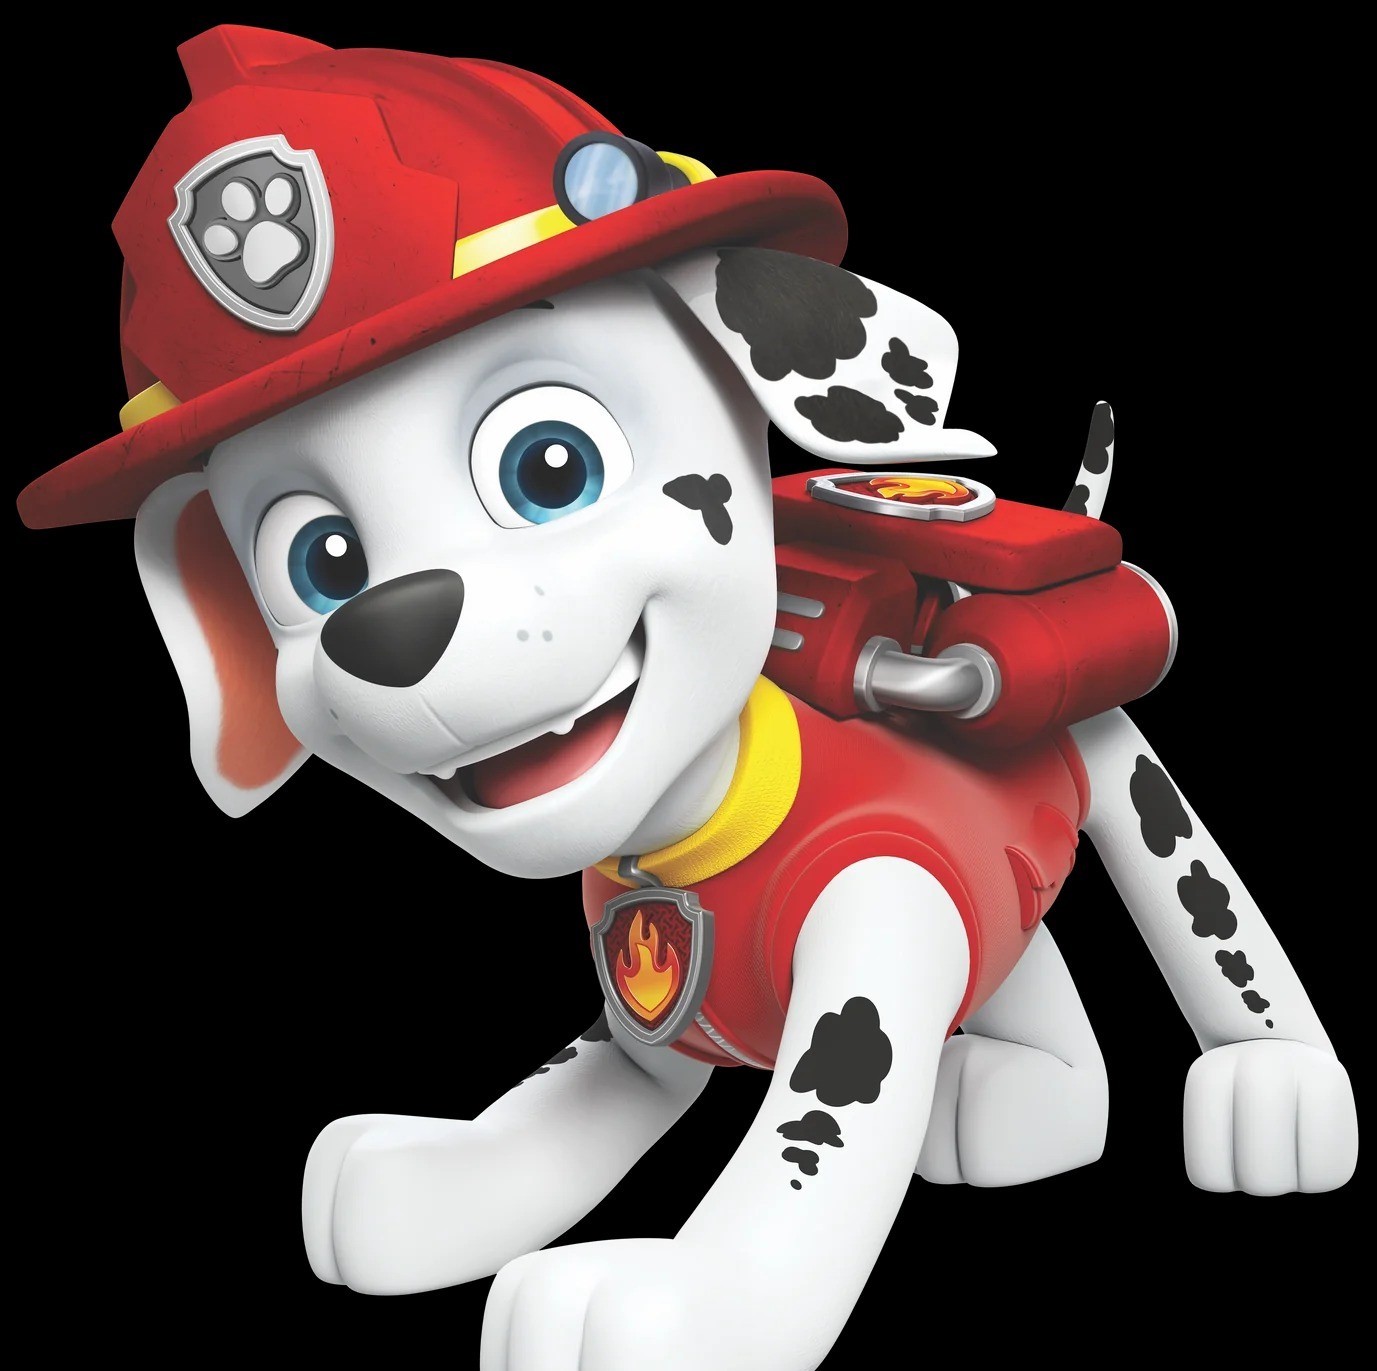 14 Facts About Marshall (Paw Patrol) 